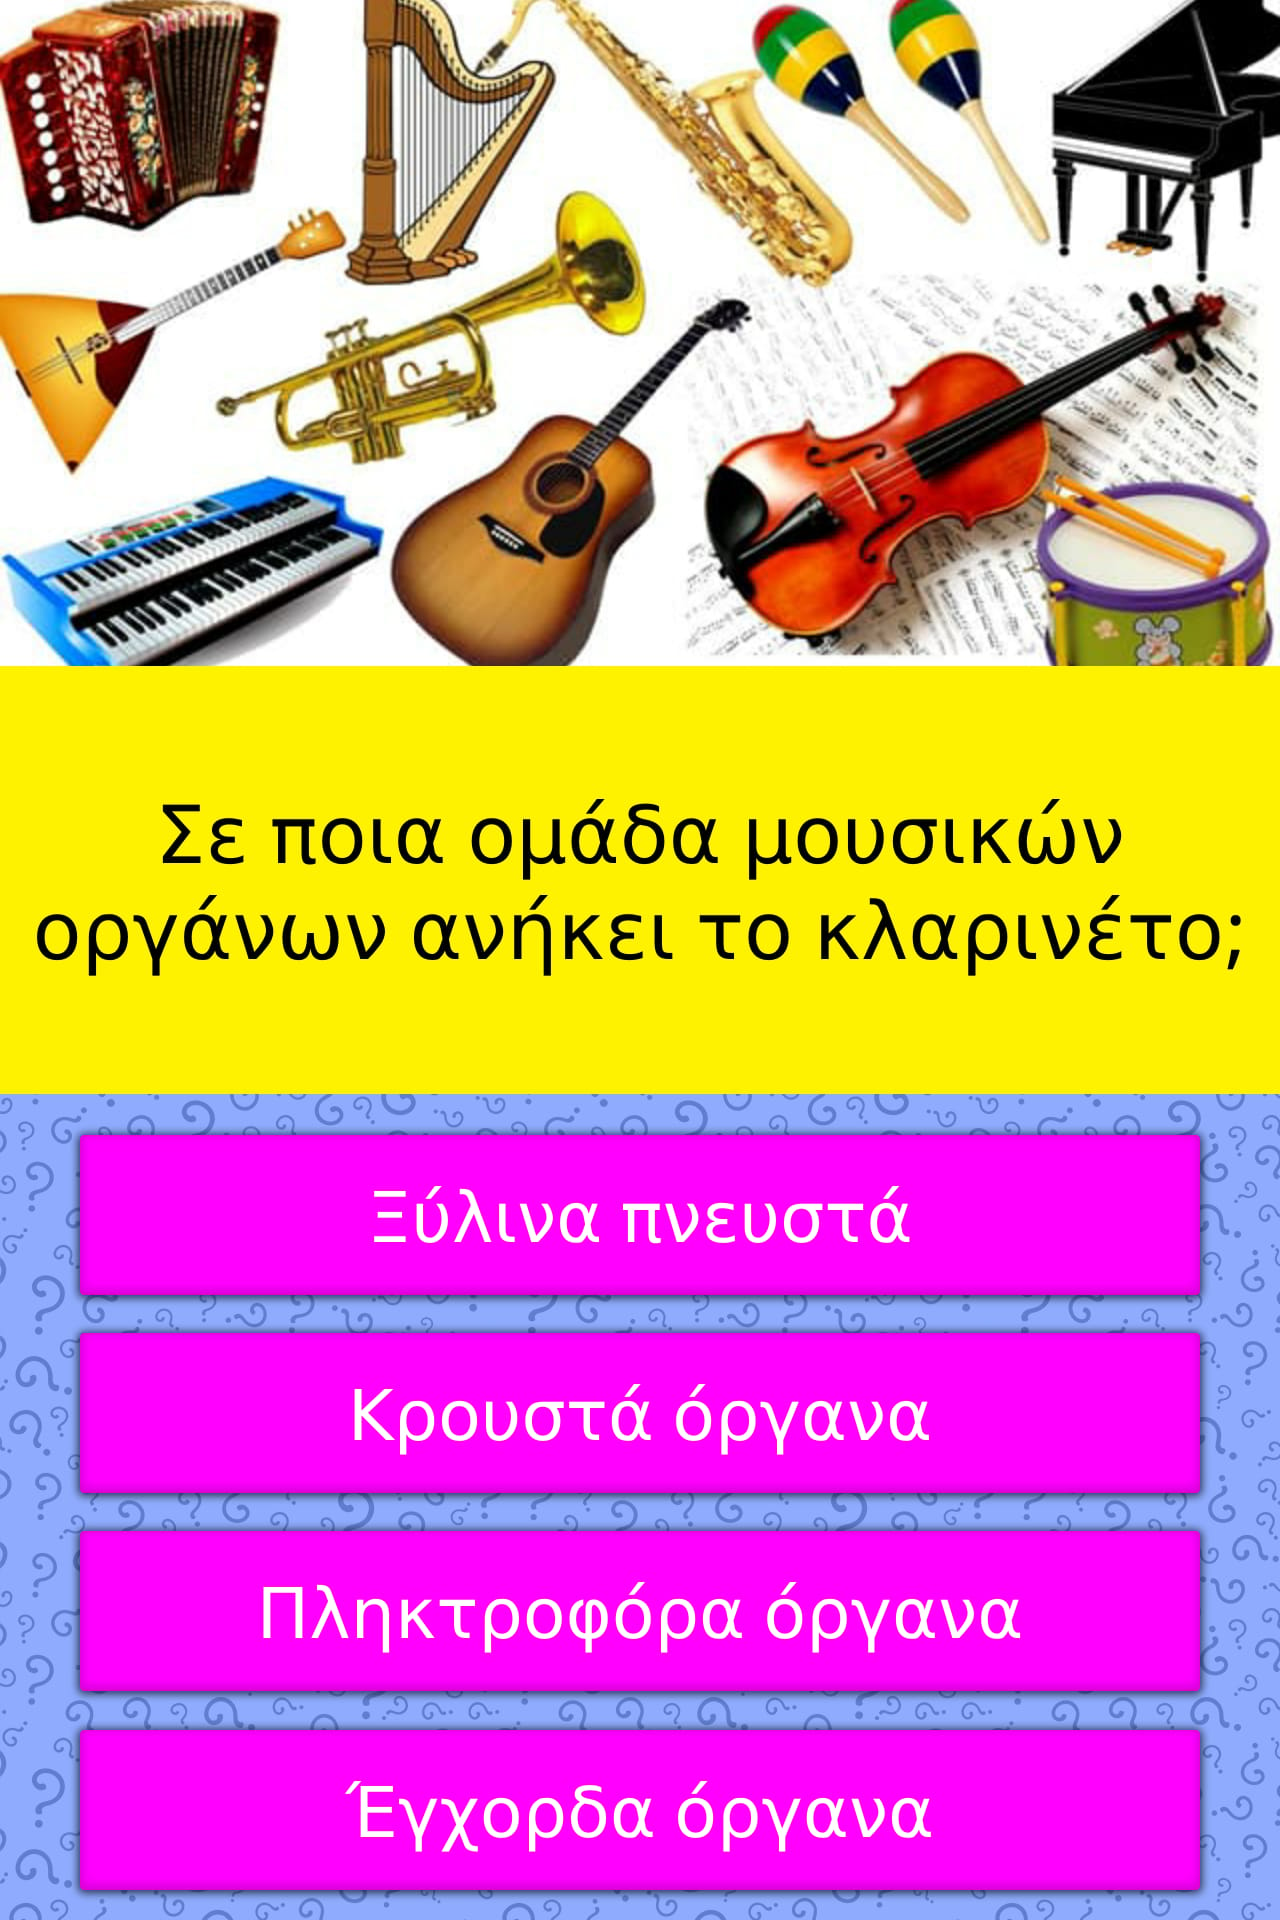 musical instruments quiz questions and answers